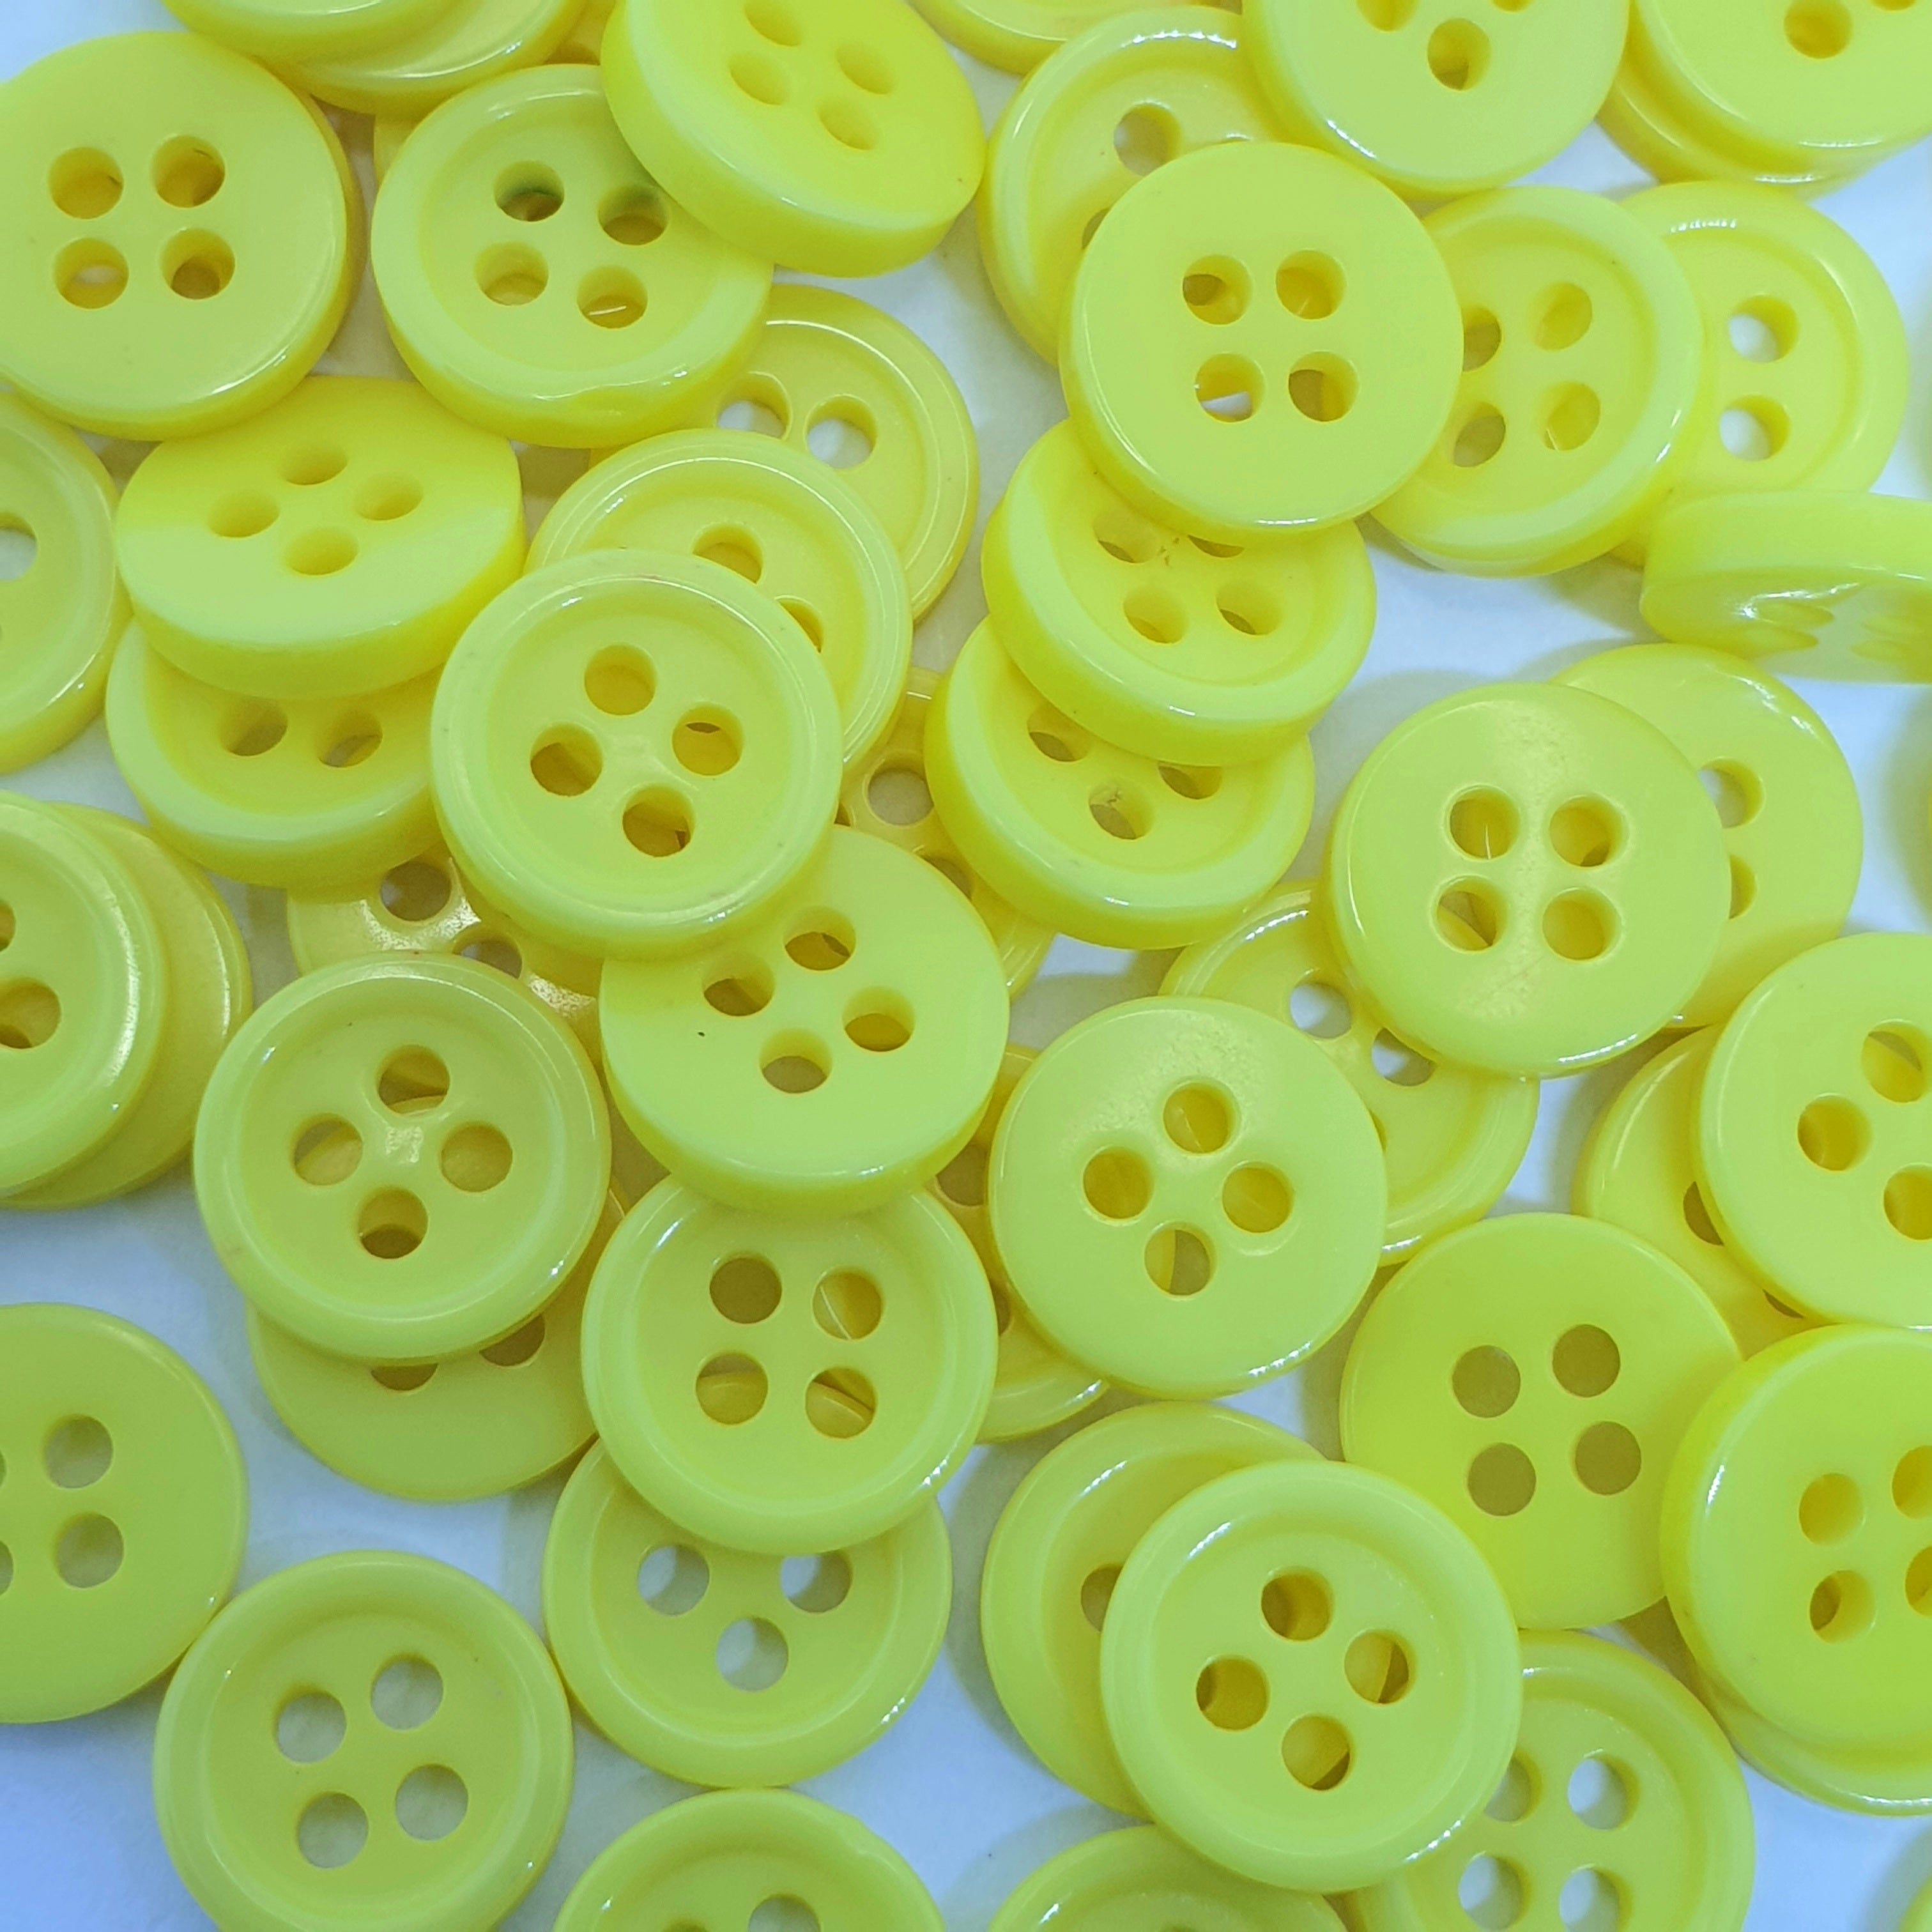 MajorCrafts 120pcs 9mm Lemon Yellow 4 Holes Small Round Resin Sewing Buttons